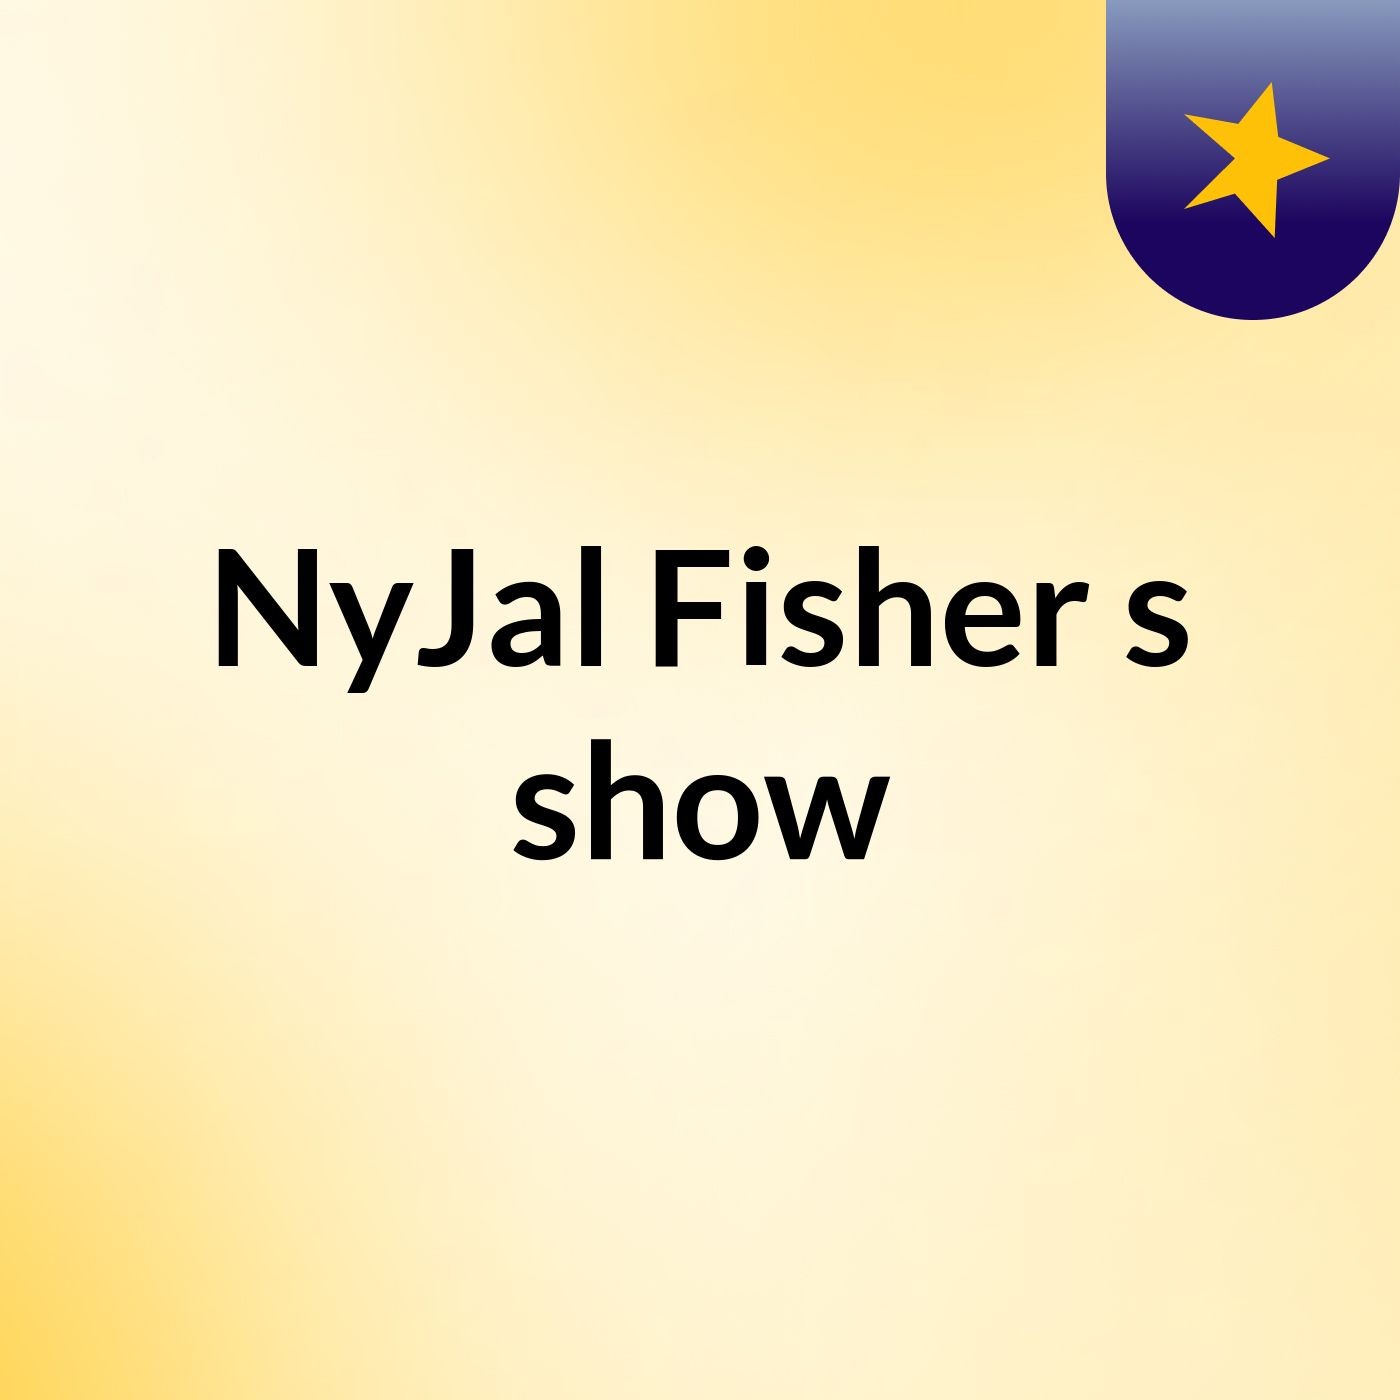 NyJal Fisher's show